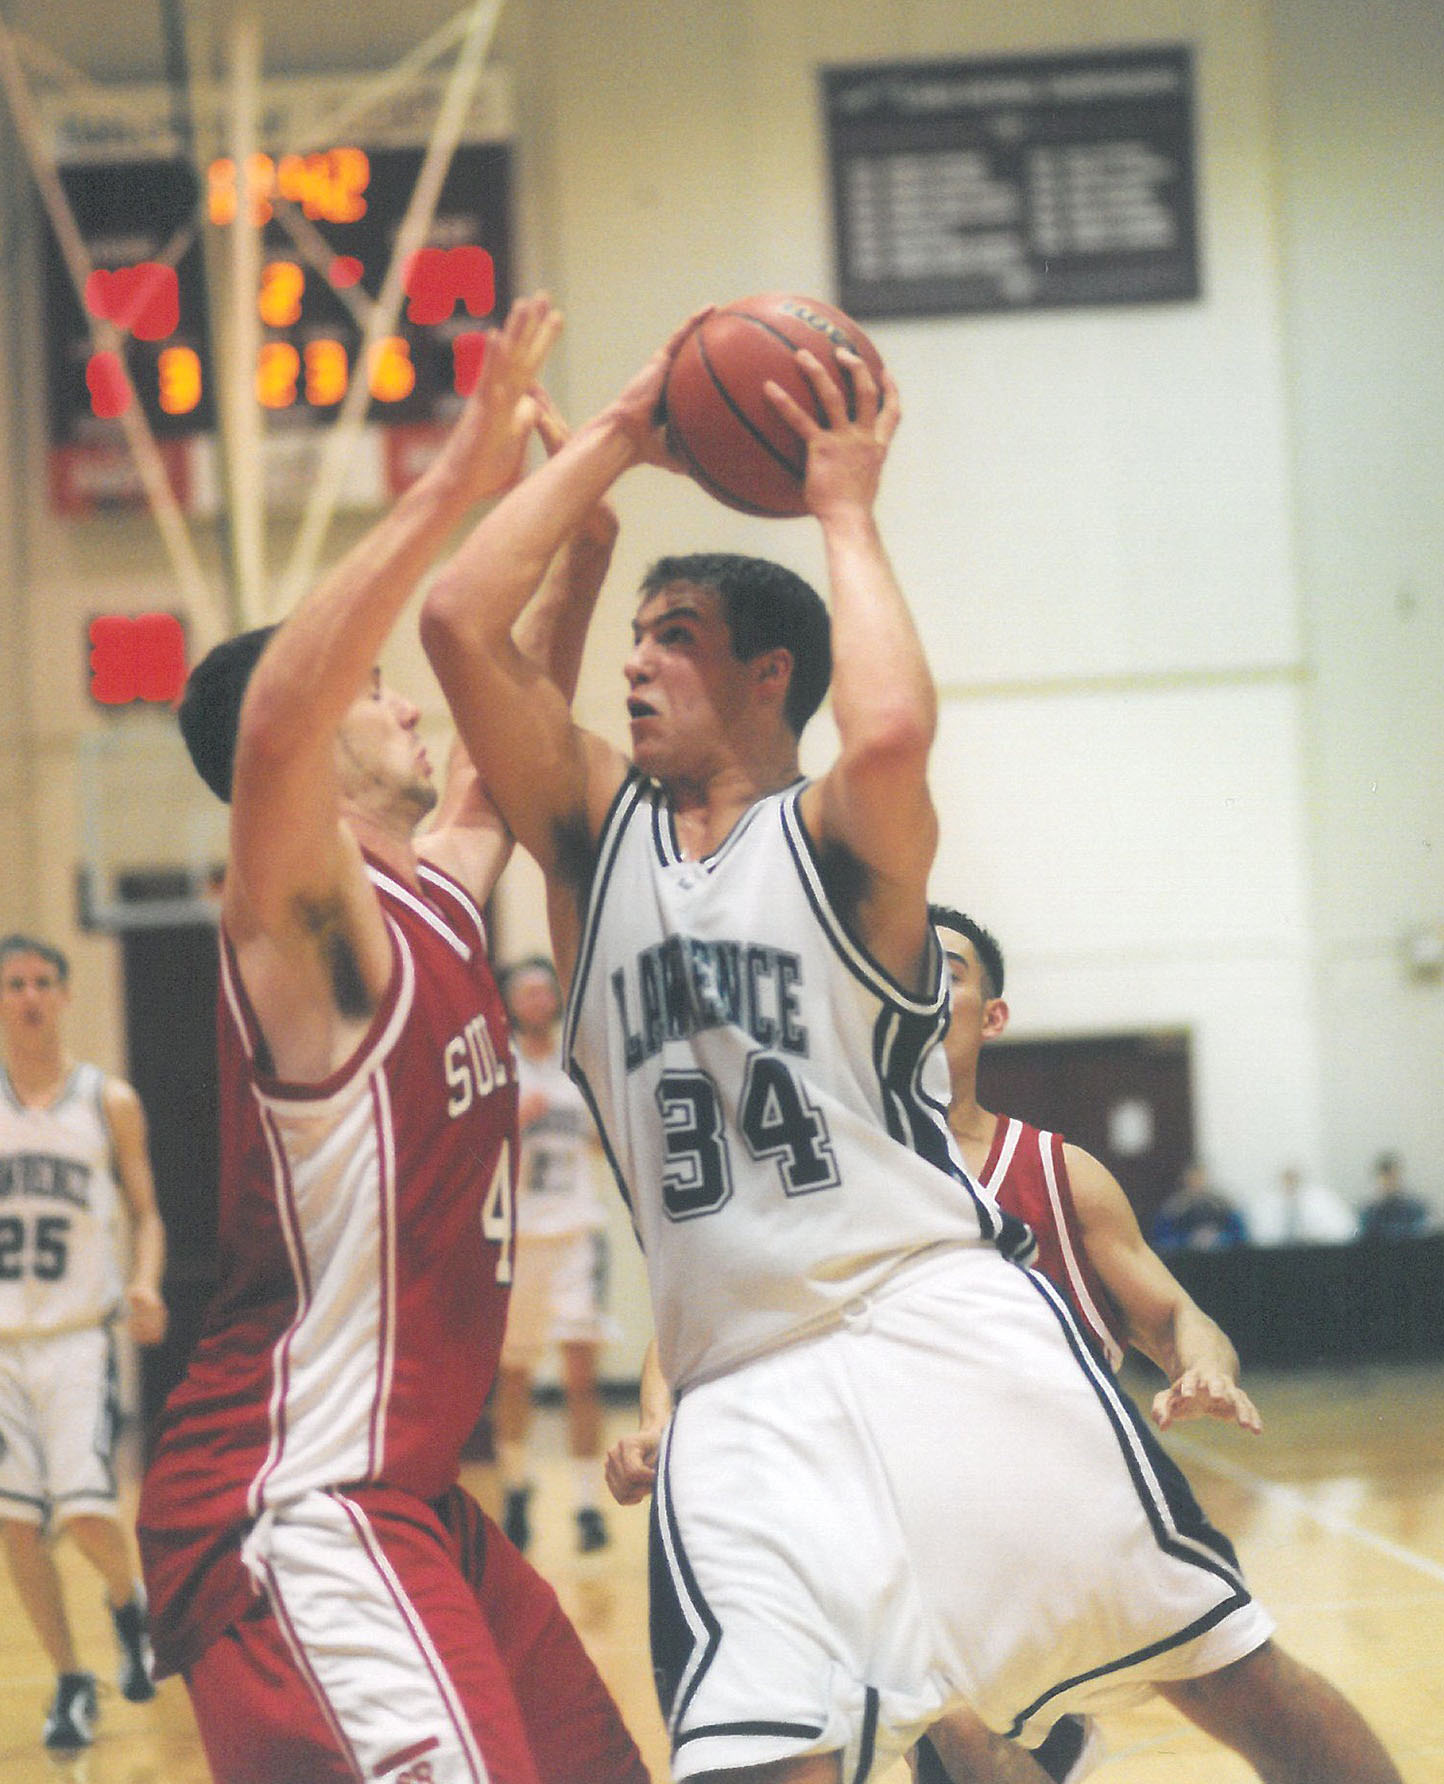 Chris Braier playing against Sul Ross State in the 2003-04 NCAA Division III tournament